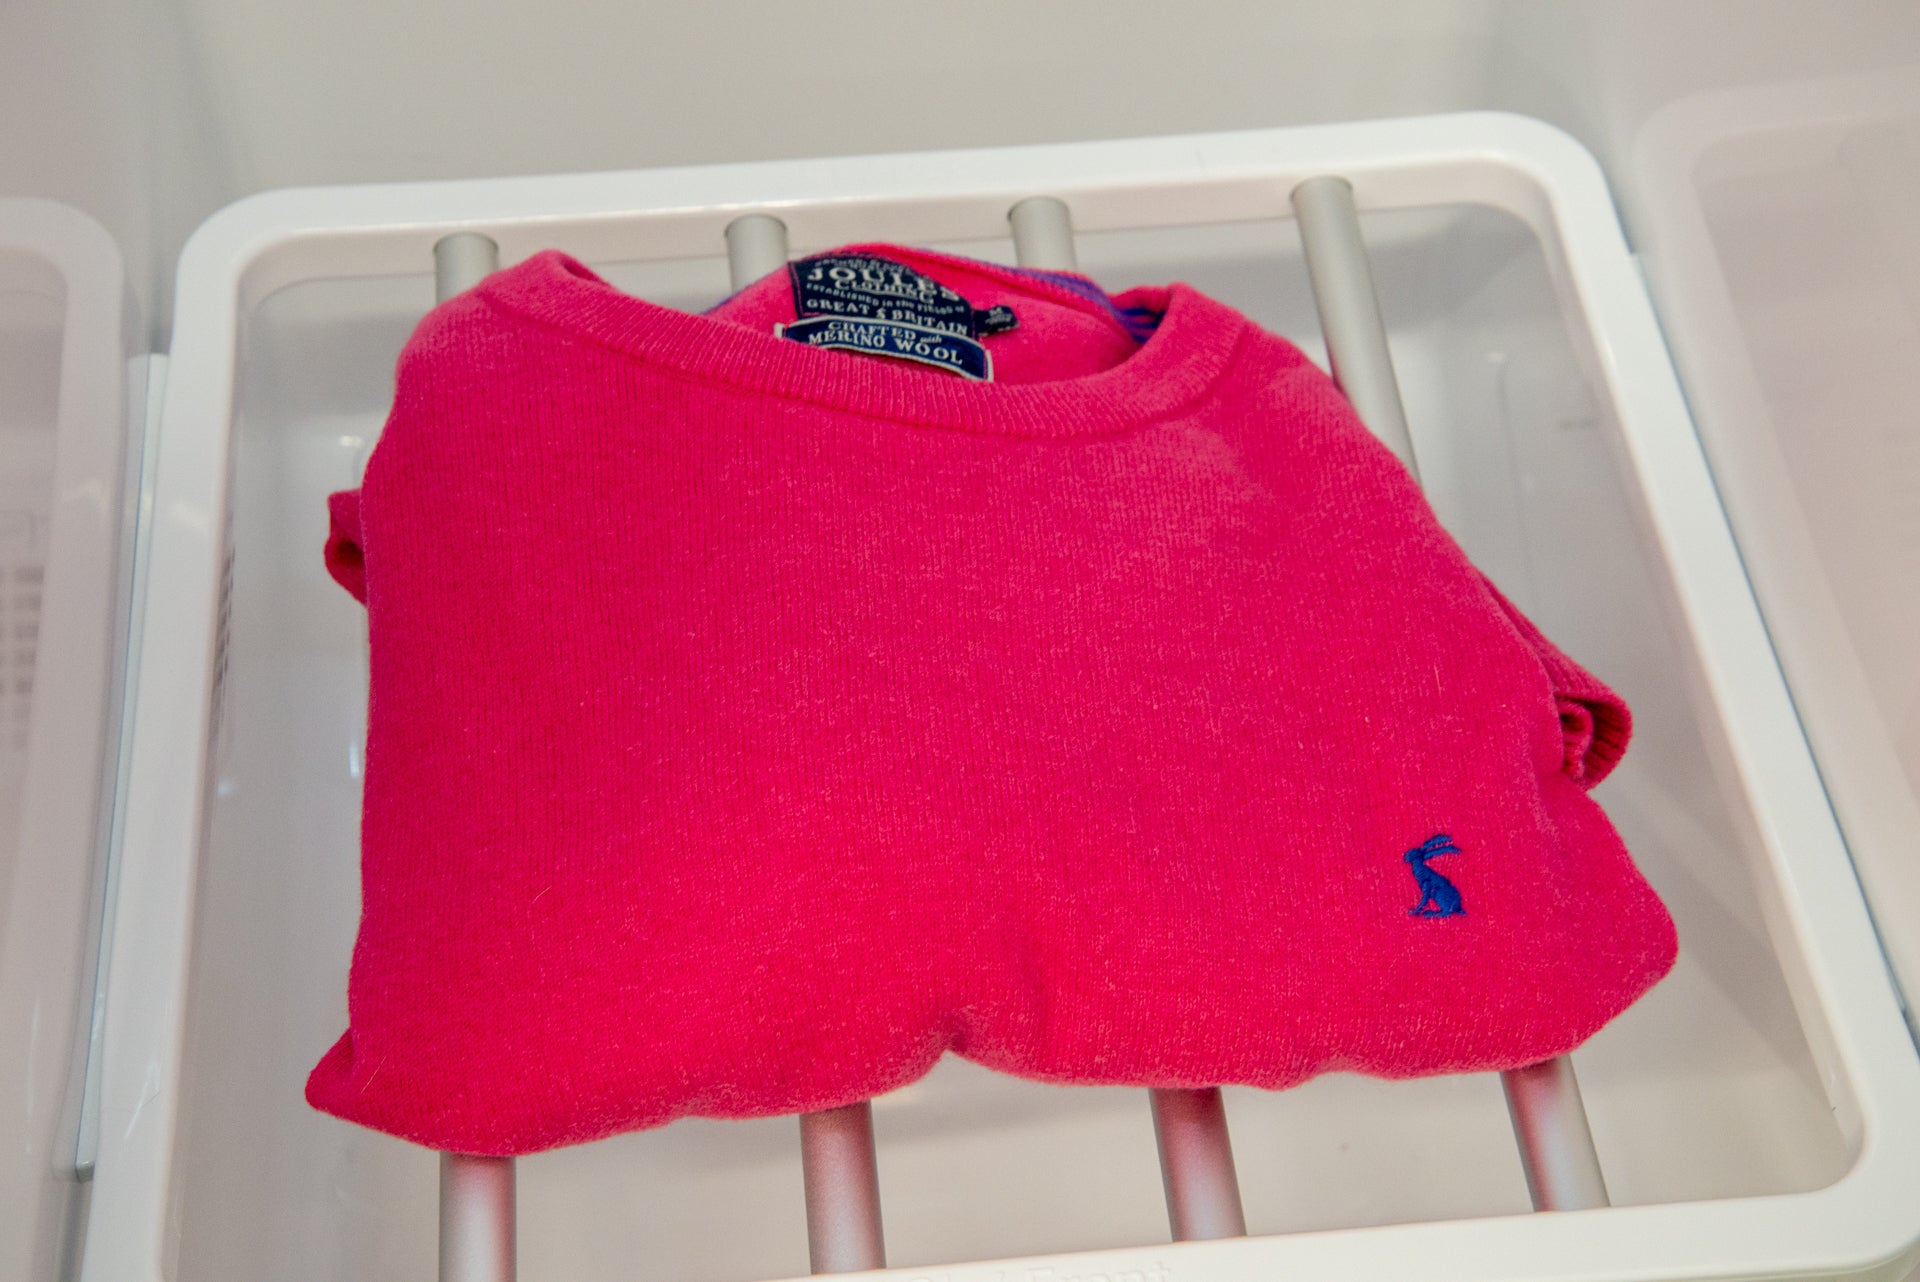 A red t-shirt placed in LG styler